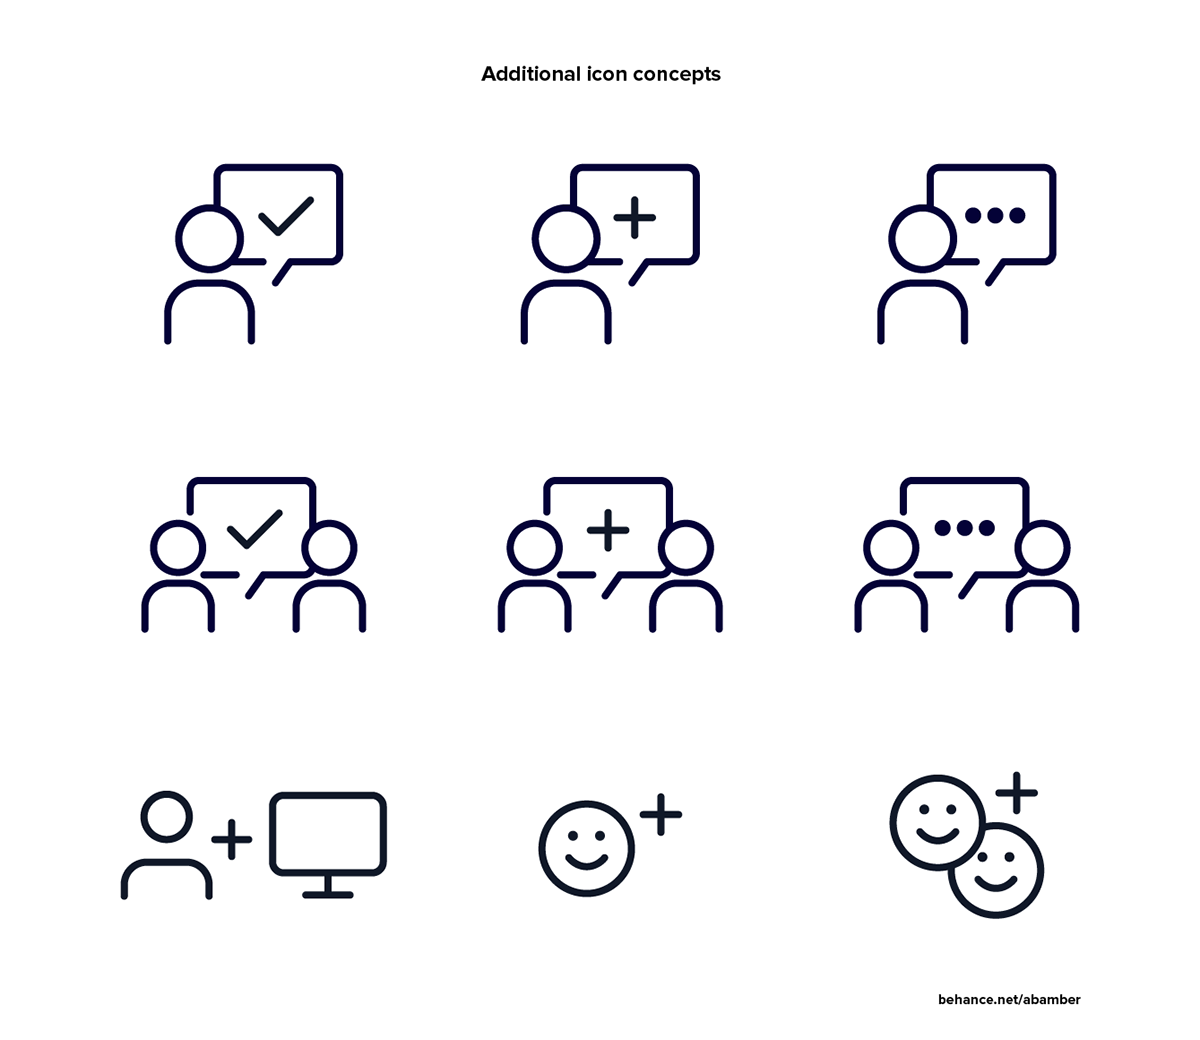 icons ILLUSTRATION  vector Illustrator corporate icons icon concepting icons on website illustrator for tech tech icons icon design 